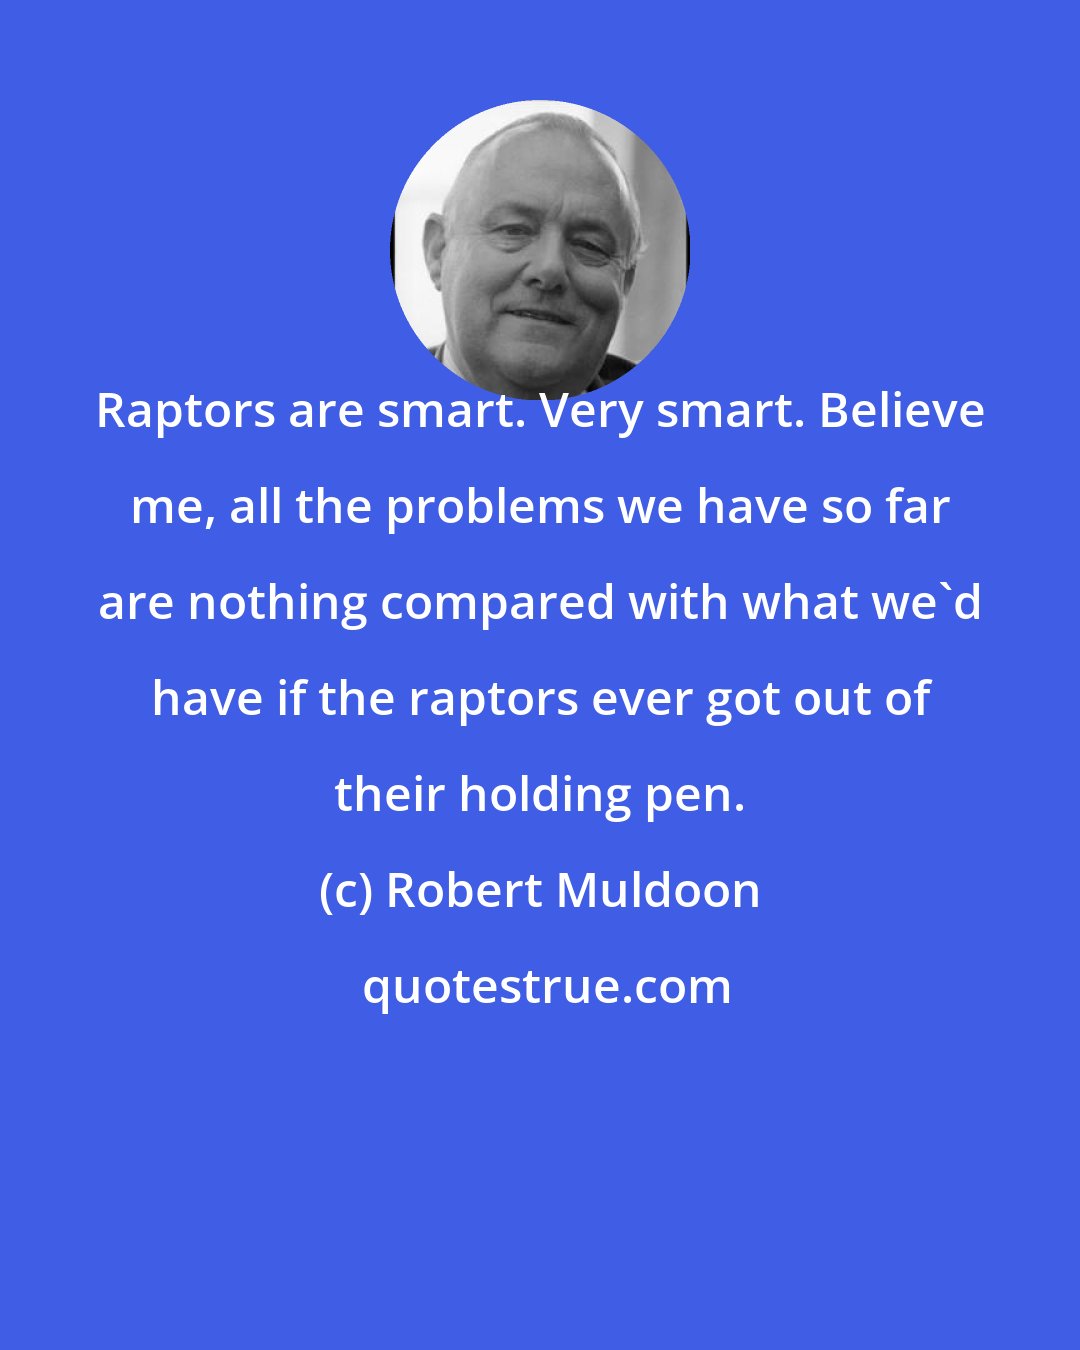 Robert Muldoon: Raptors are smart. Very smart. Believe me, all the problems we have so far are nothing compared with what we'd have if the raptors ever got out of their holding pen.